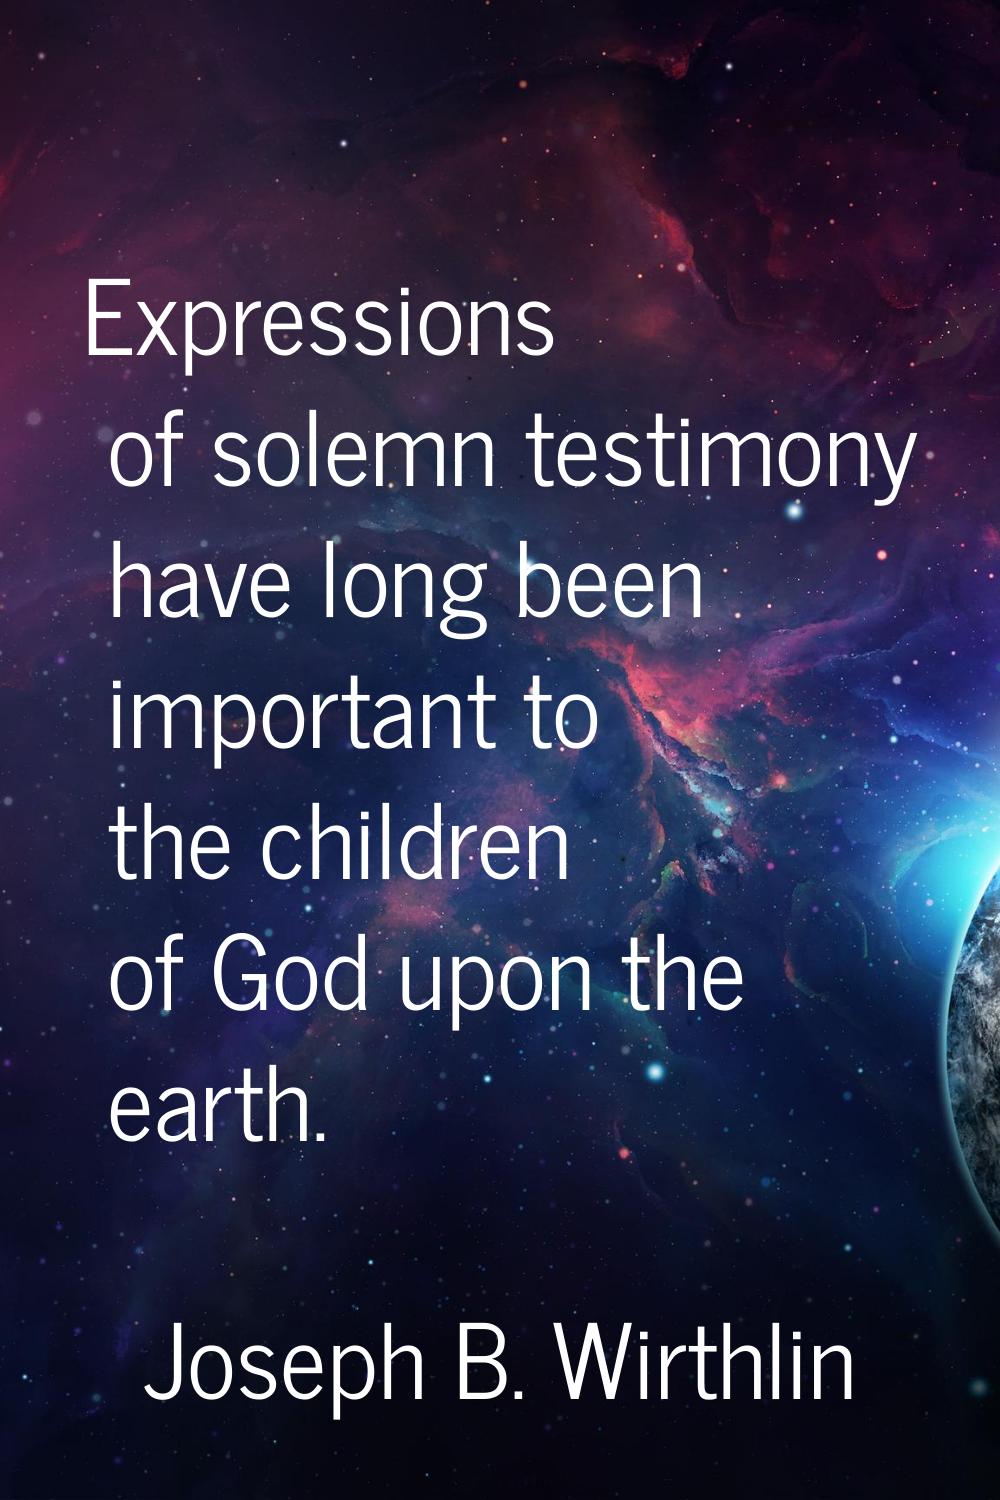 Expressions of solemn testimony have long been important to the children of God upon the earth.